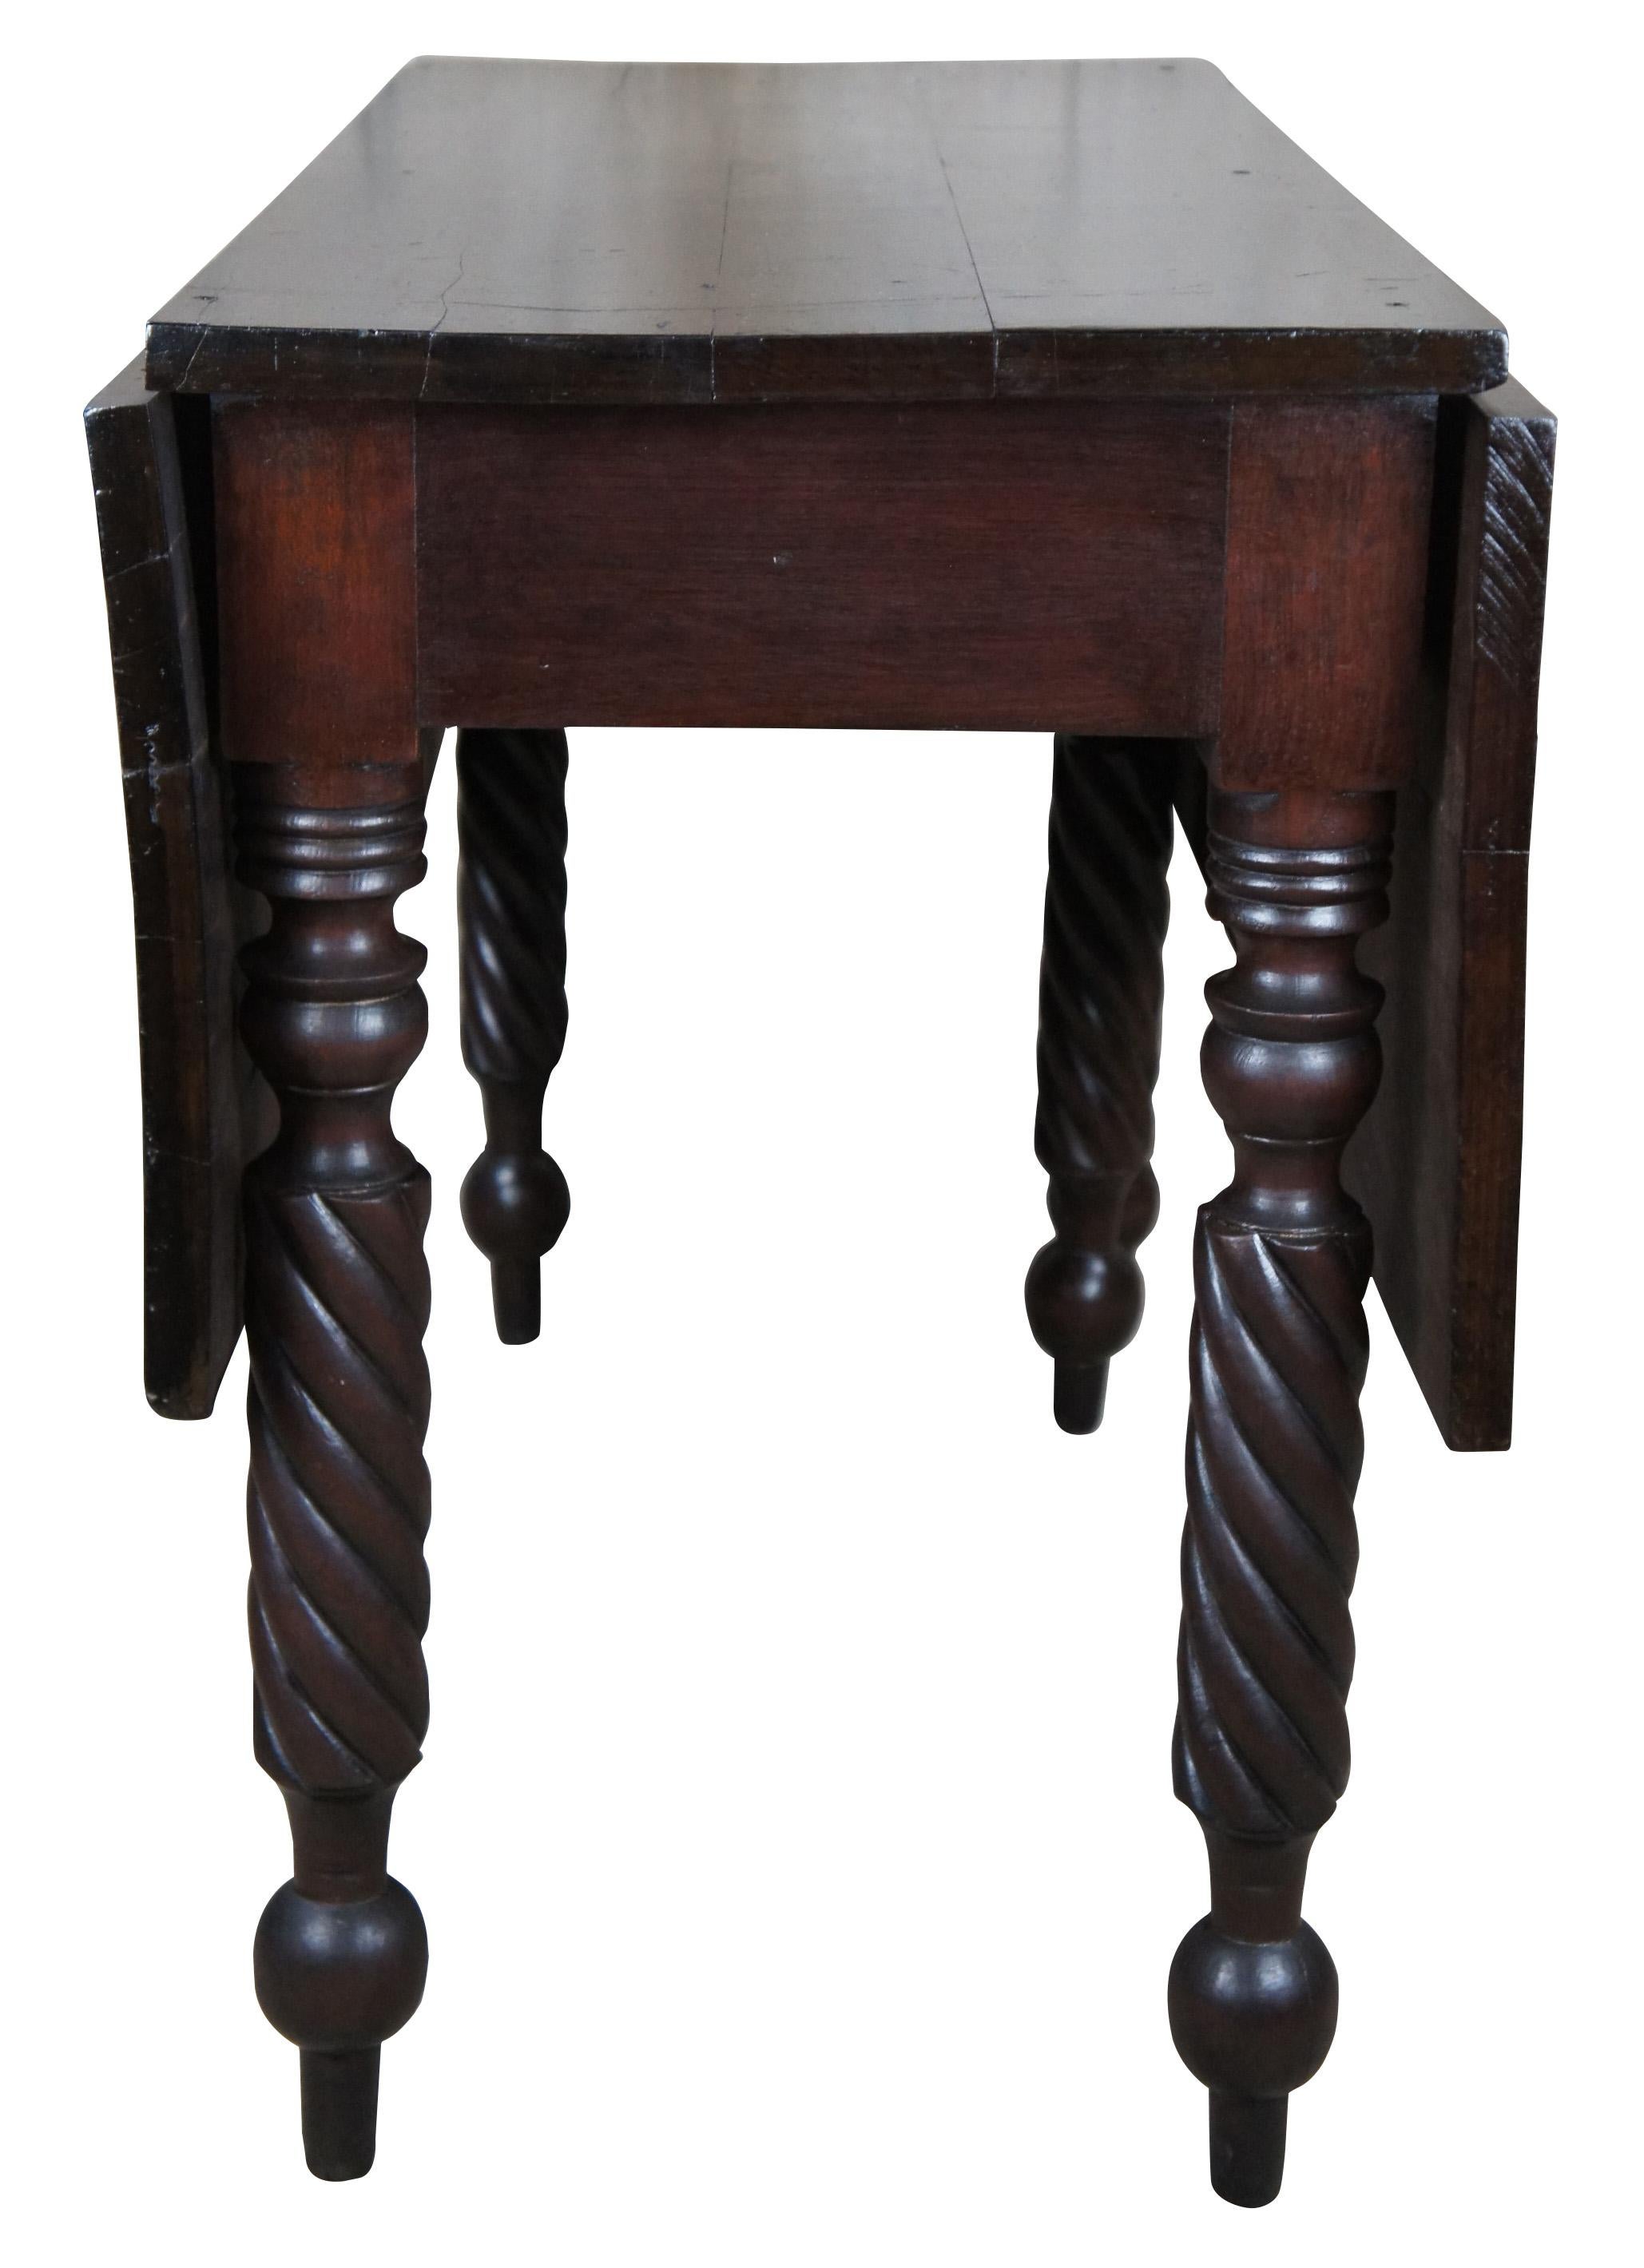 Antique 19th century dropleaf gateleg console or dining table. Made of walnut featuring two leaves with turned barley twisted legs.

Measures: 44.5